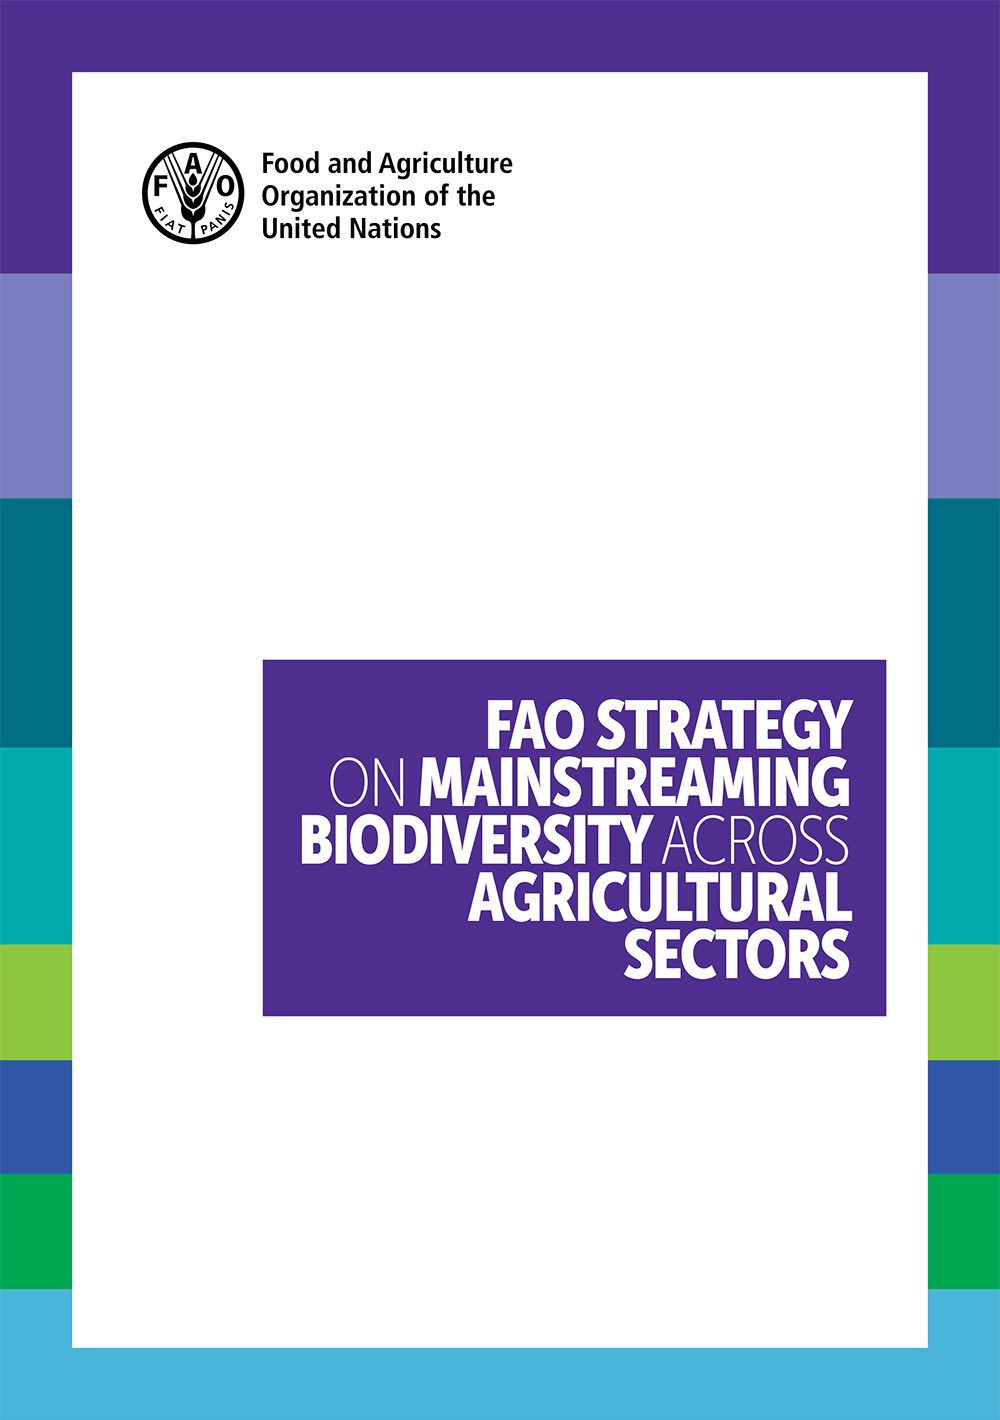 EN FAO Strategy on Mainstreaming Biodiversity across Agricultural Sectors